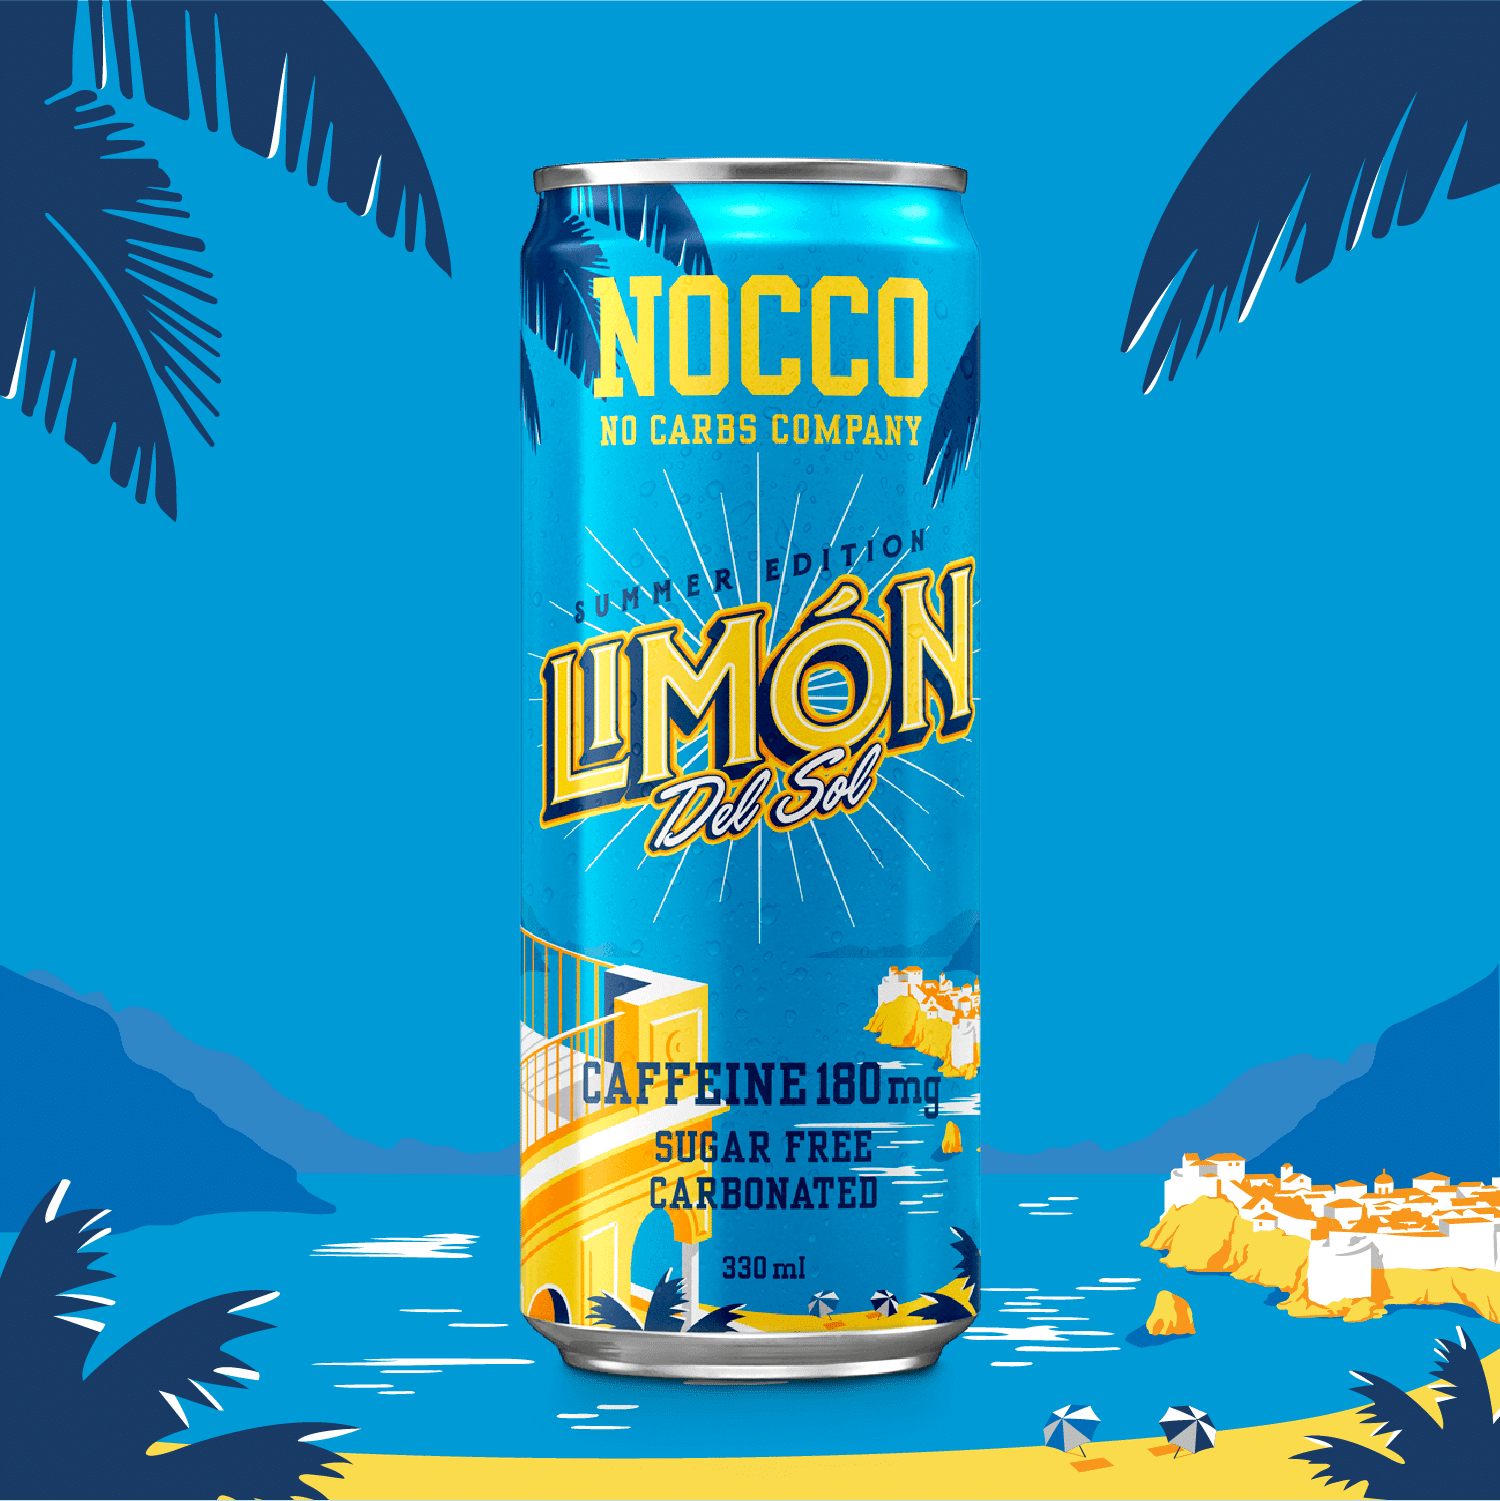 Nocco New Products Banner